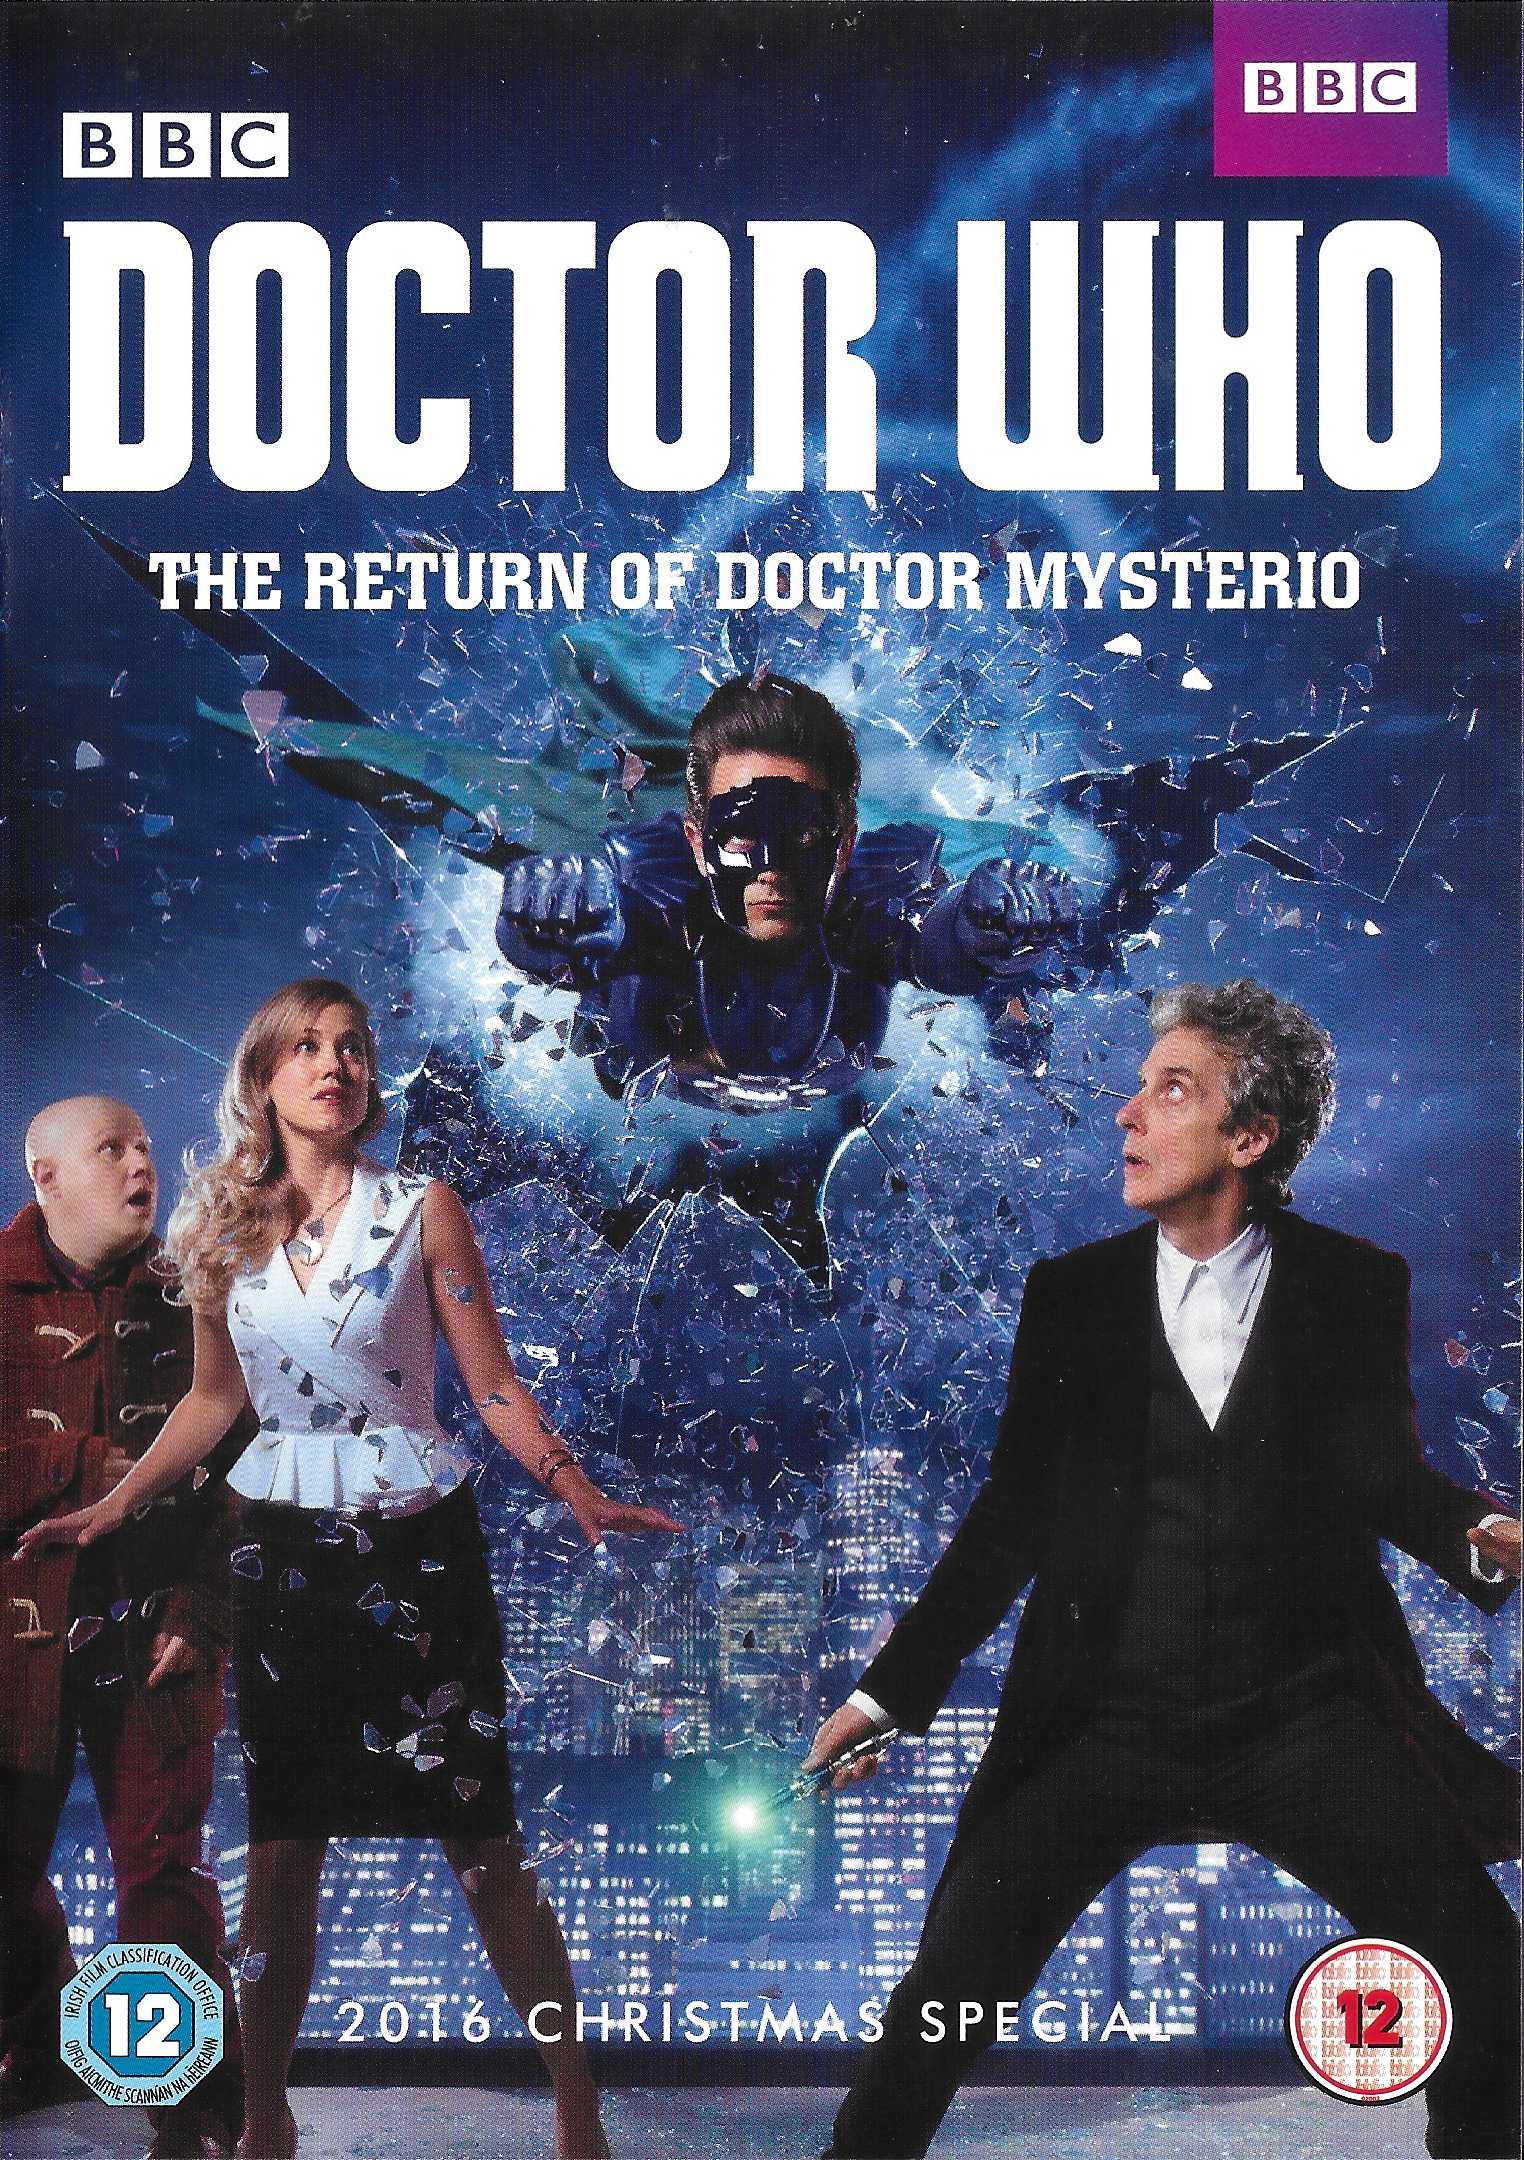 Picture of BBCDVD 4190 Doctor Who - The return of Doctor Mysterio (2016 Christmas special) by artist Steven Moffat from the BBC dvds - Records and Tapes library